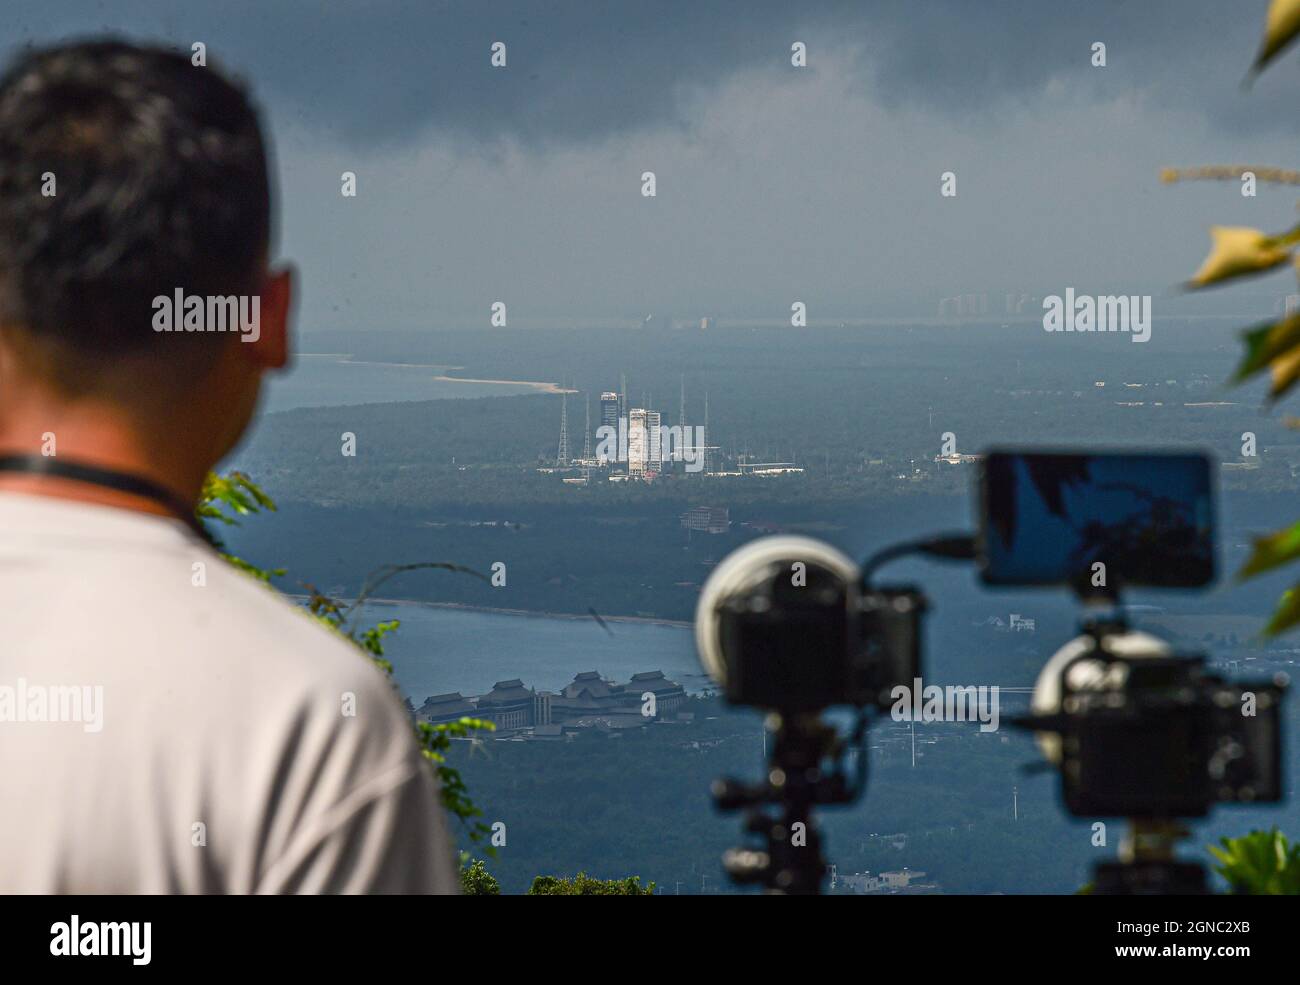 (210924) -- WENCHANG, Sept. 24, 2021 (Xinhua) -- Aerospace photography enthusiast Guan Tianyu waits to capture the moment of blast-off of the Long March-7 Y4 rocket, carrying Tianzhou-3, on top of a hill in Wenchang City, south China's Hainan Province, Sept. 20, 2021. The Long March-7 Y4 rocket, carrying Tianzhou-3, blasted off from the Wenchang Spacecraft Launch Site on Sept. 20, 2021, right in front of numerous cameras erected by photography enthusiasts with special interest in astronautics. Enchanted by the sophisticated launching technologies and the tremendous challenges of shooting the l Stock Photo